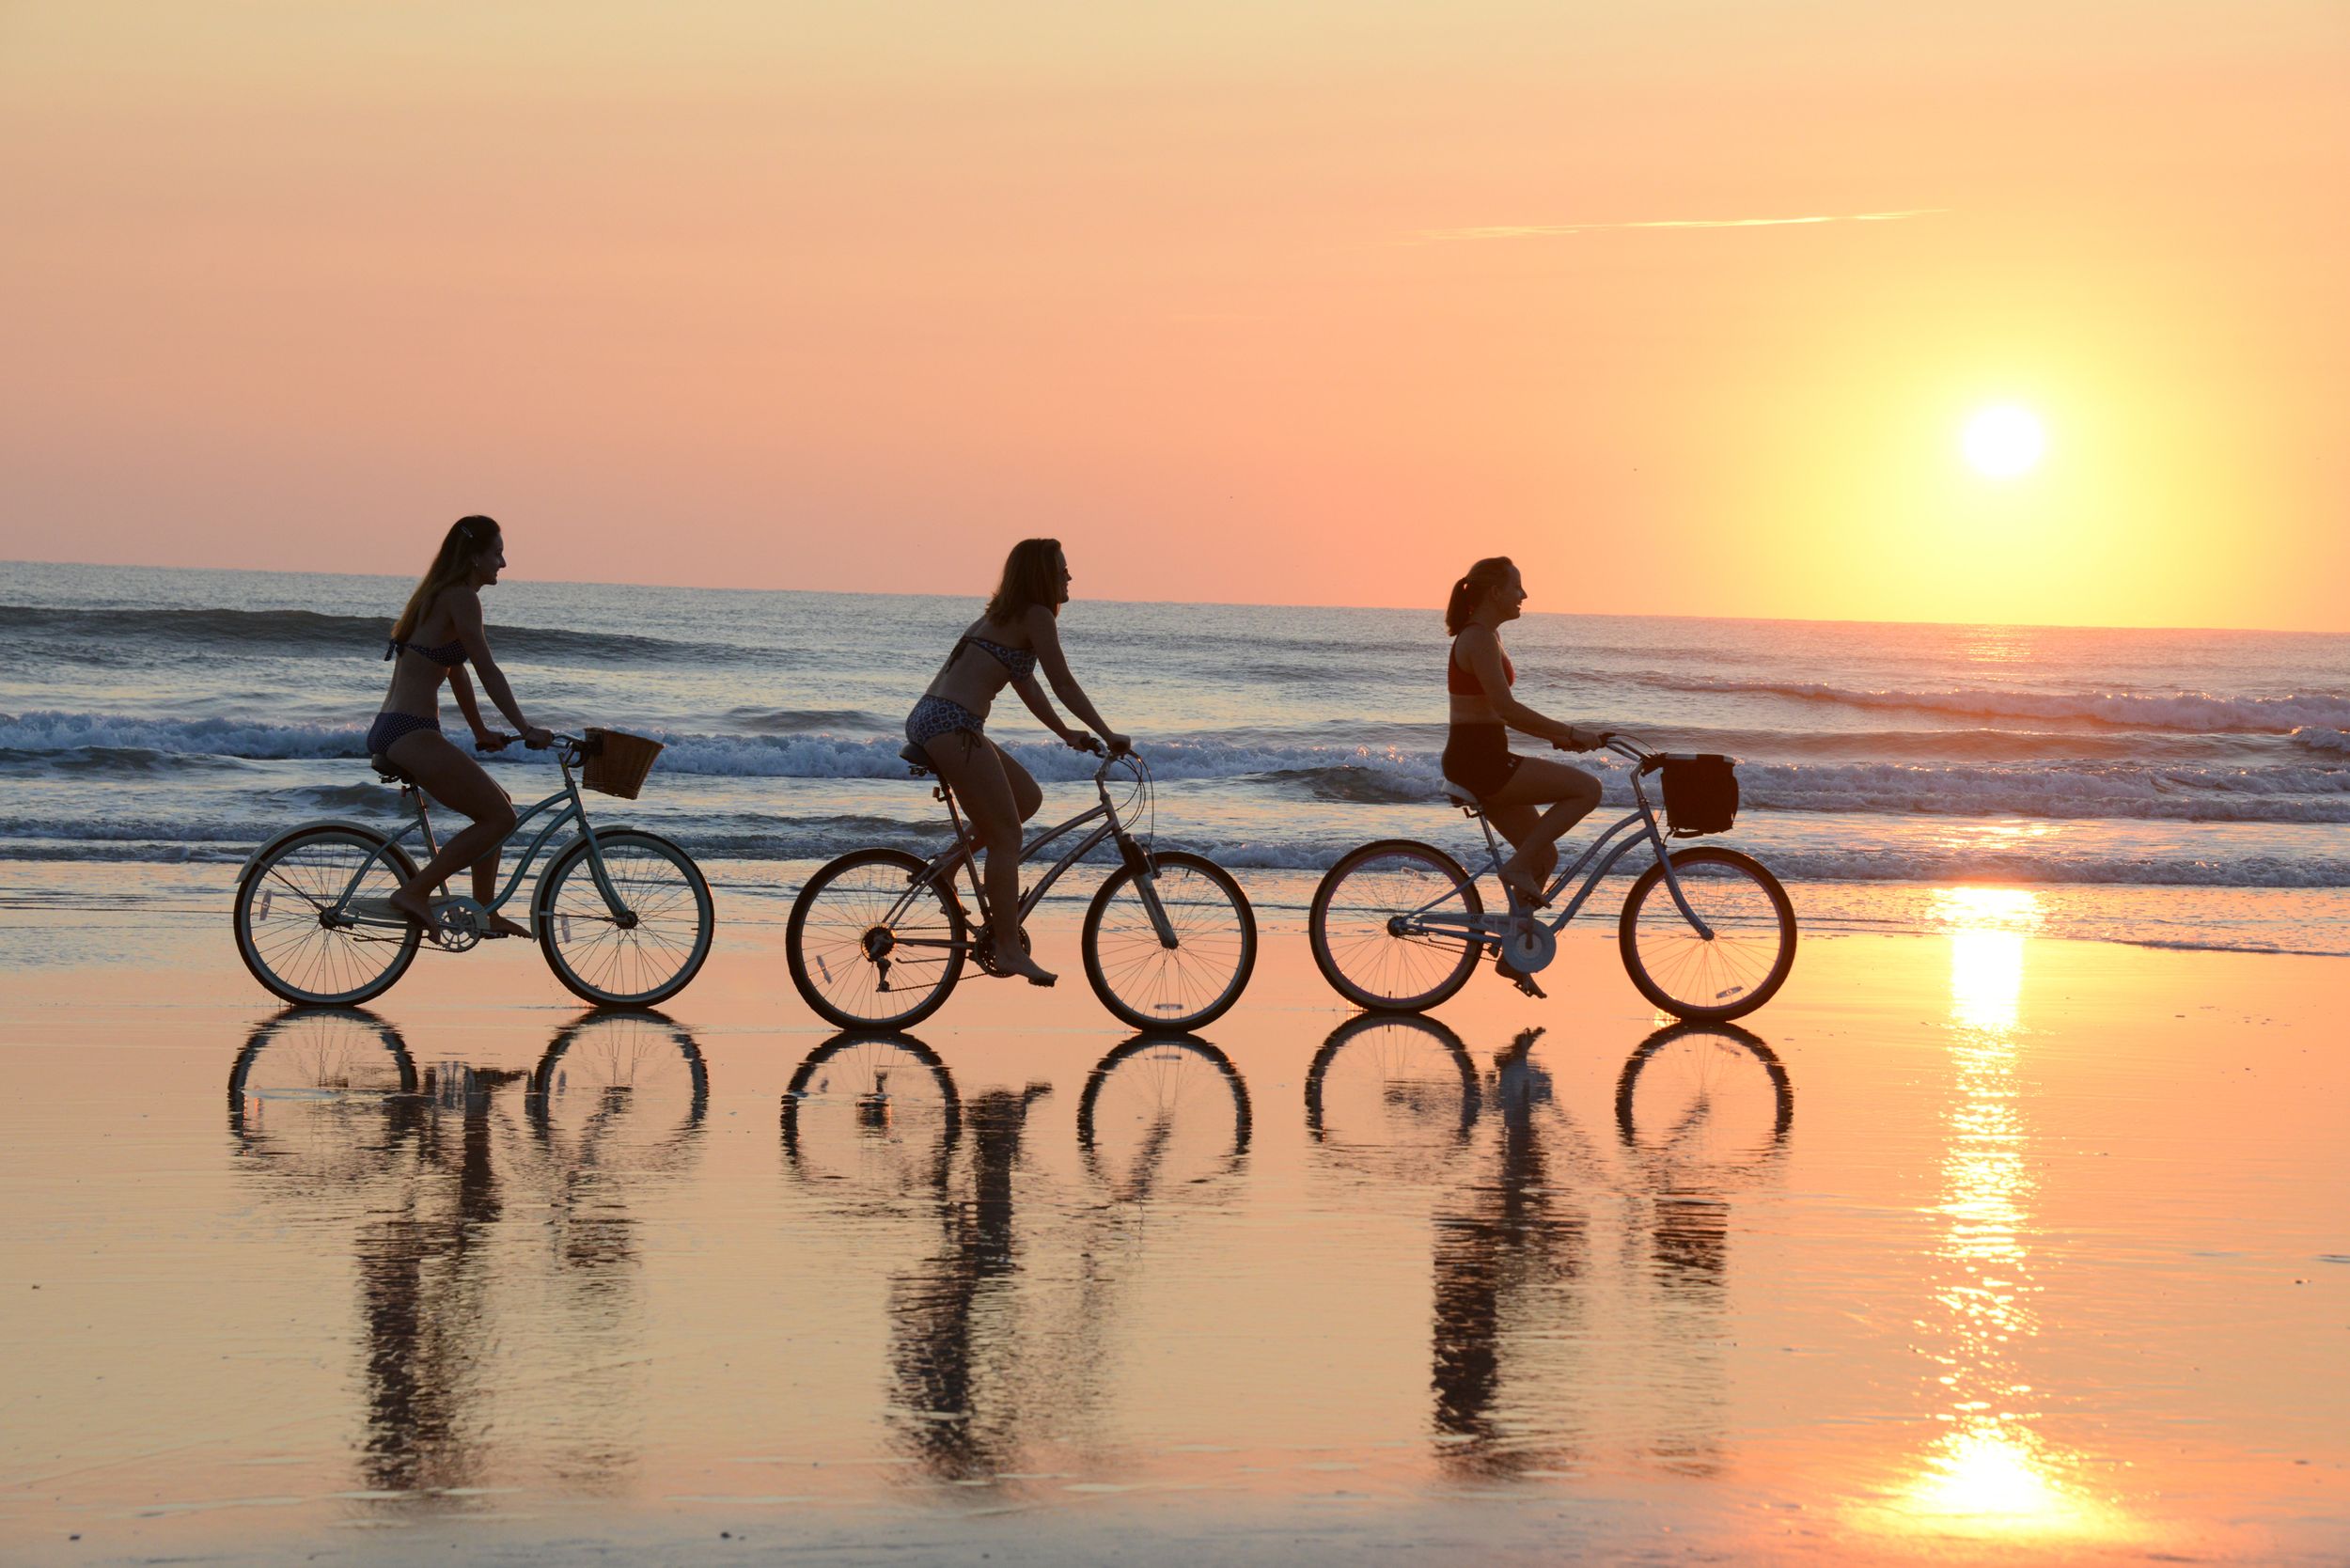 Three girls ride bicycles on the beach at sunrise